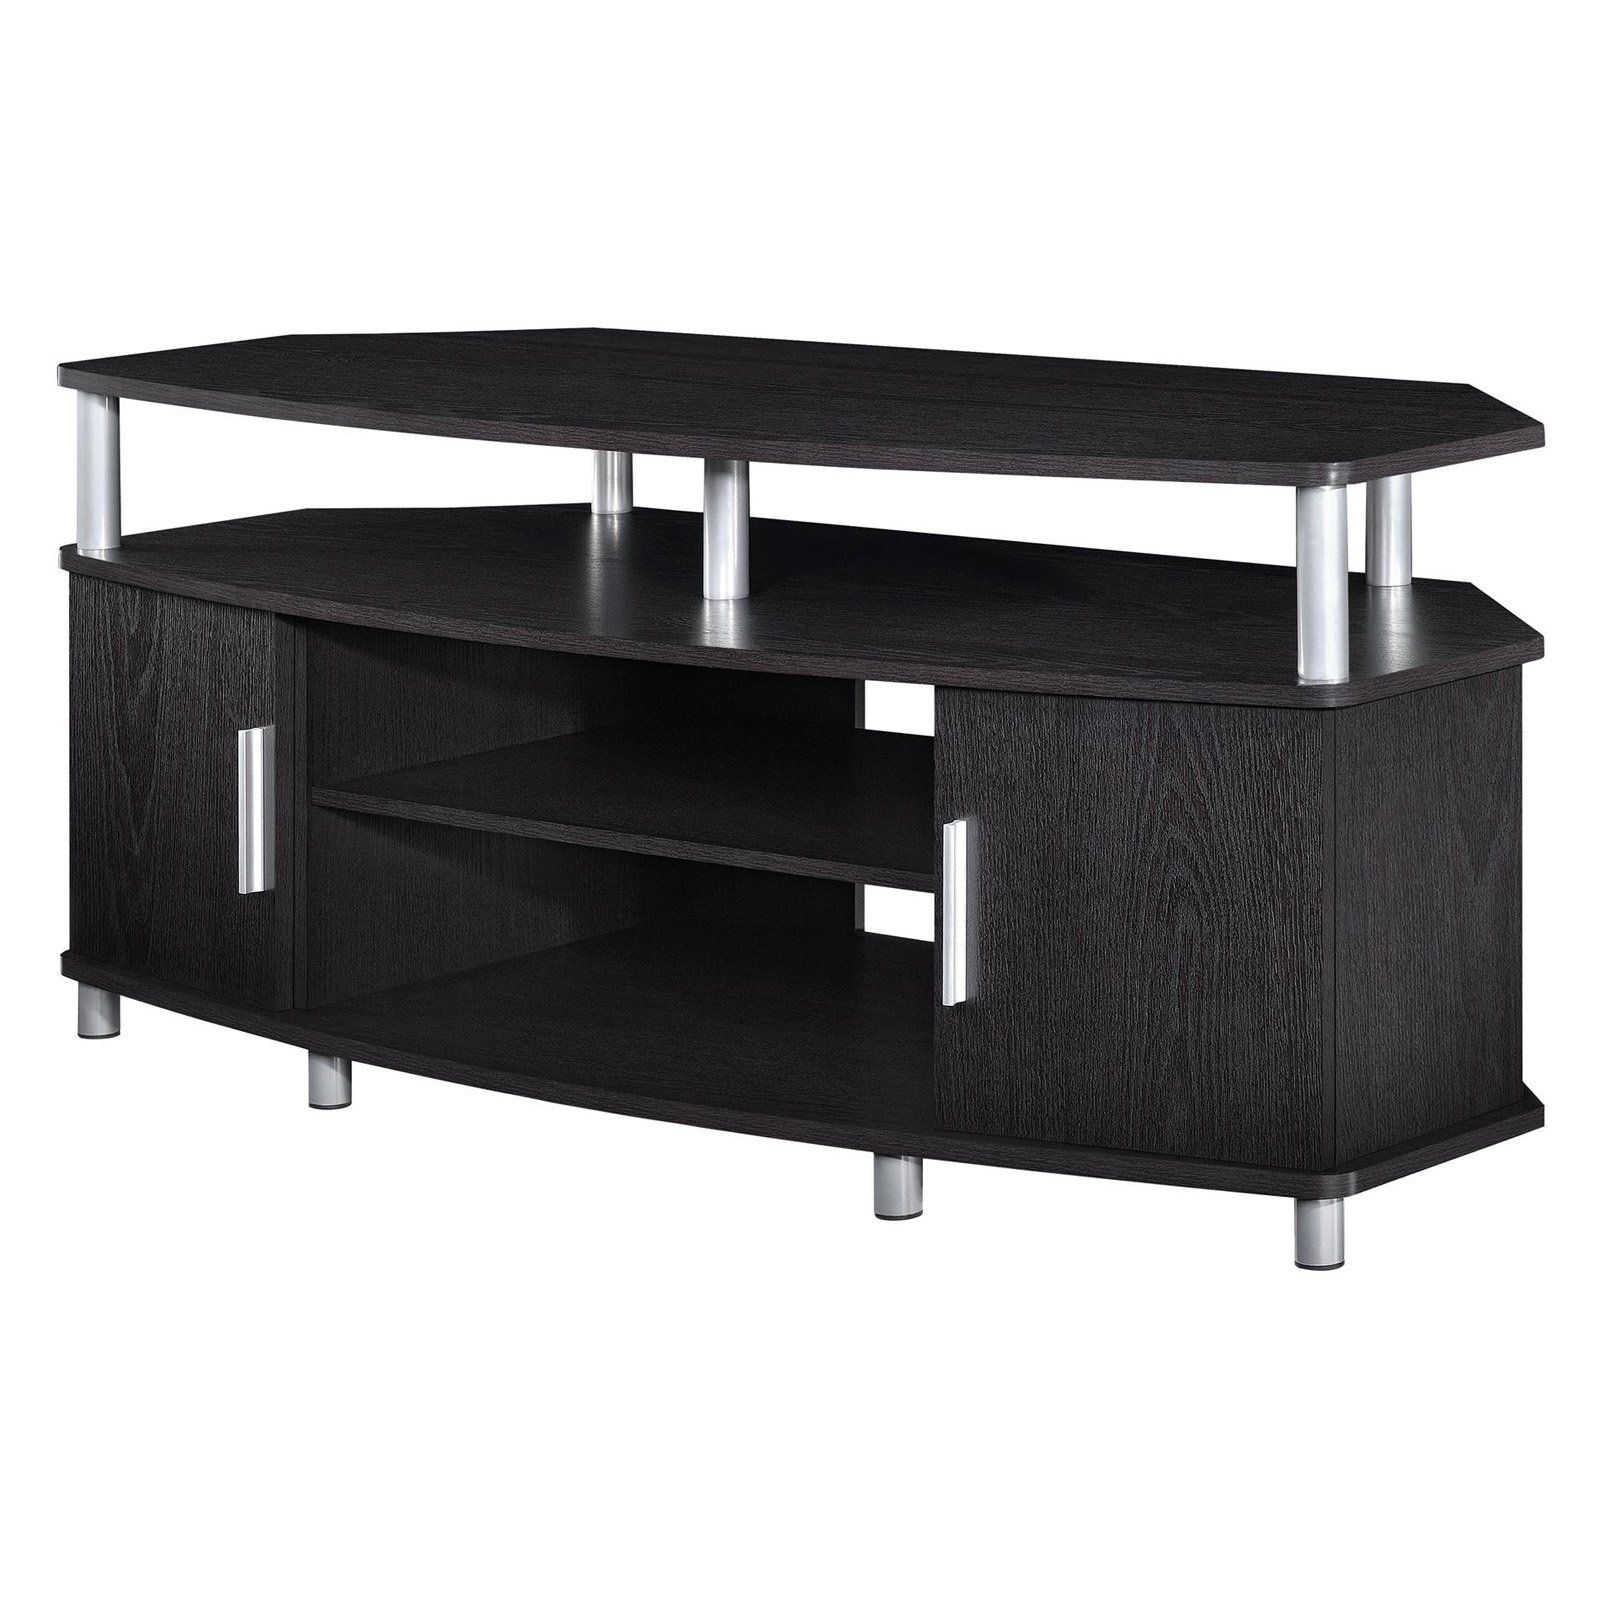 Most Recently Released Ameriwood Home Carson Corner Tv Stand For Tvs Up To 50 Pertaining To Lansing Tv Stands For Tvs Up To 50" (View 20 of 25)